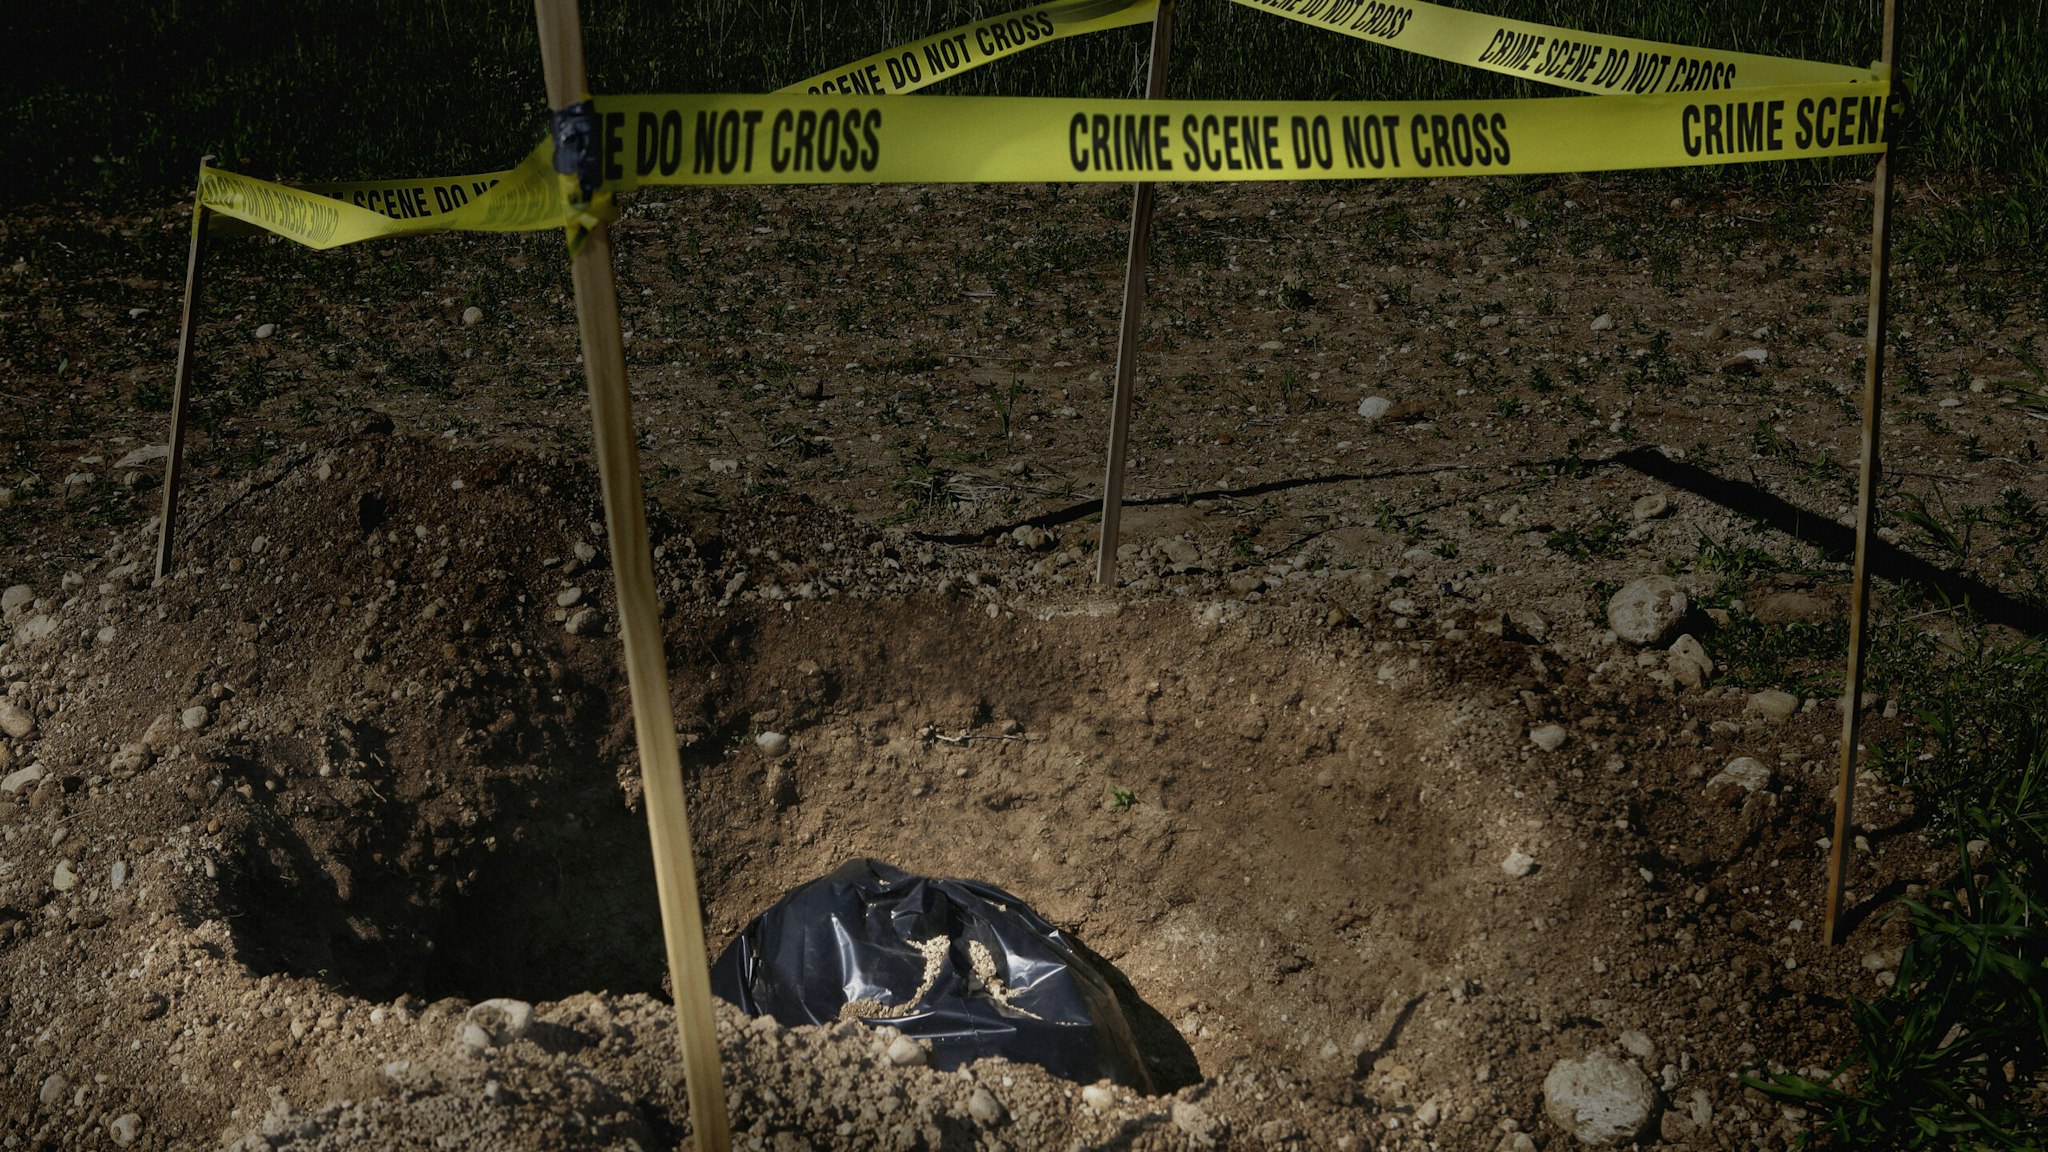 Garbage bag in dug hole with crime scene tape - stock photo